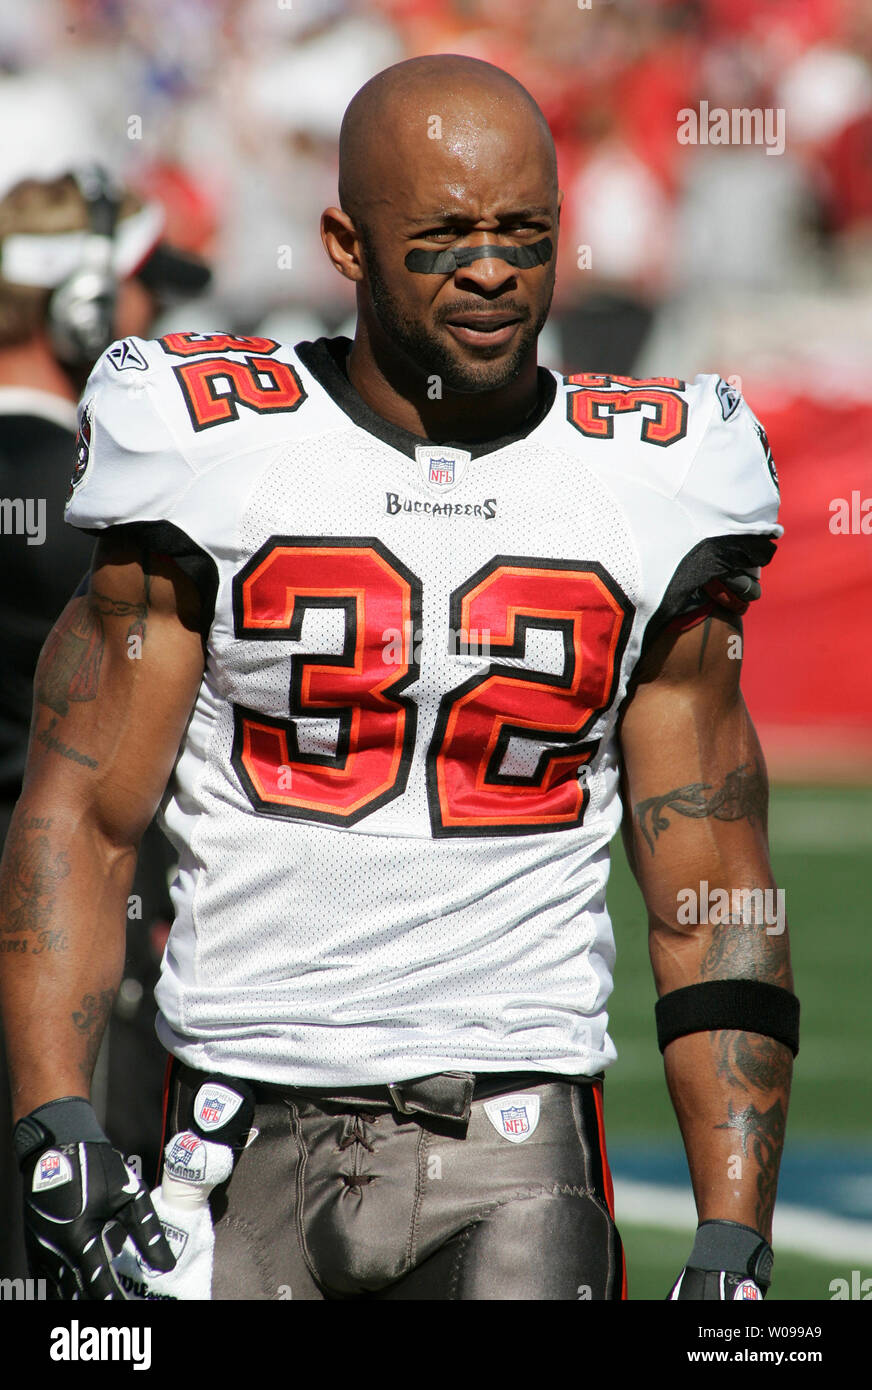 Tampa Bay Buccaneers running back Michael Pitman (32) leaves the